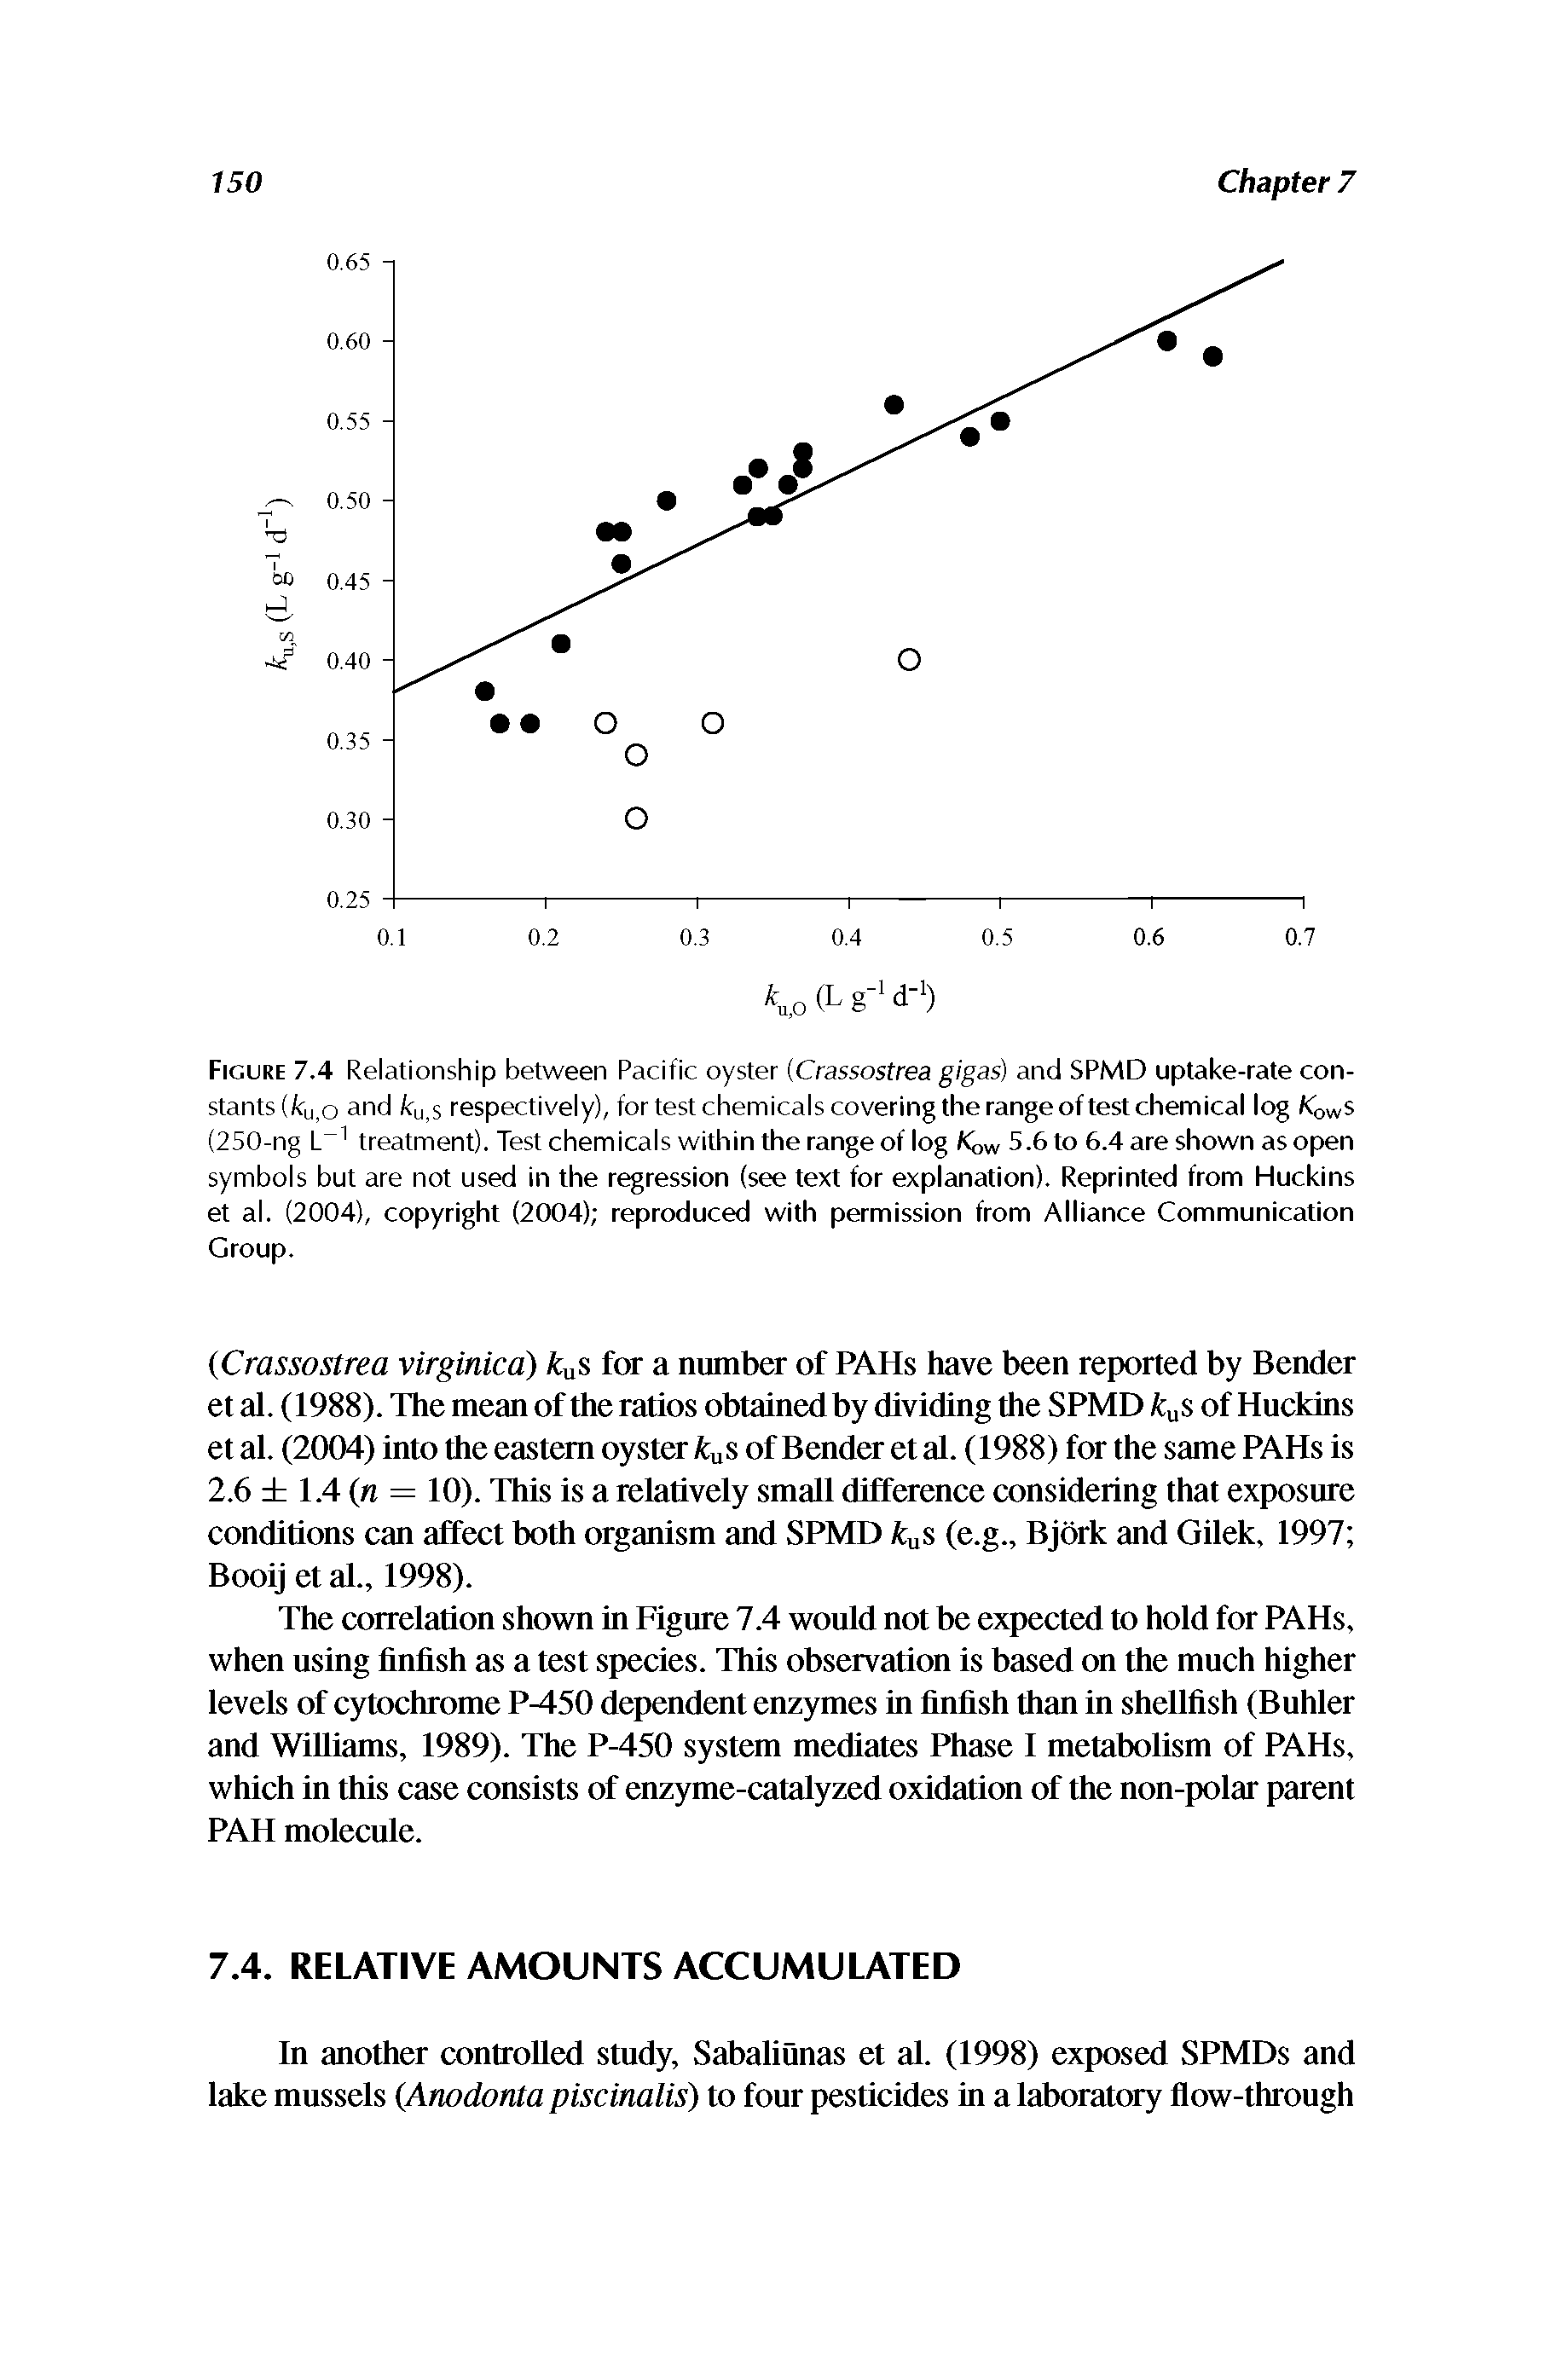 Figure 7.4 Relationship between Pacific oyster (Crassostrea gigas) and SPMD uptake-rate constants (ky.o and ku,s respectively), for test chemicals covering the range of test chemical log KqwS (250-ng treatment). Test chemicals within the range of log Kow 5.6 to 6.4 are shown as open symbols but are not used in the regression (see text for explanation). Reprinted from Huckins et al. (2004), copyright (2004) reproduced with permission from Alliance Communication Group.